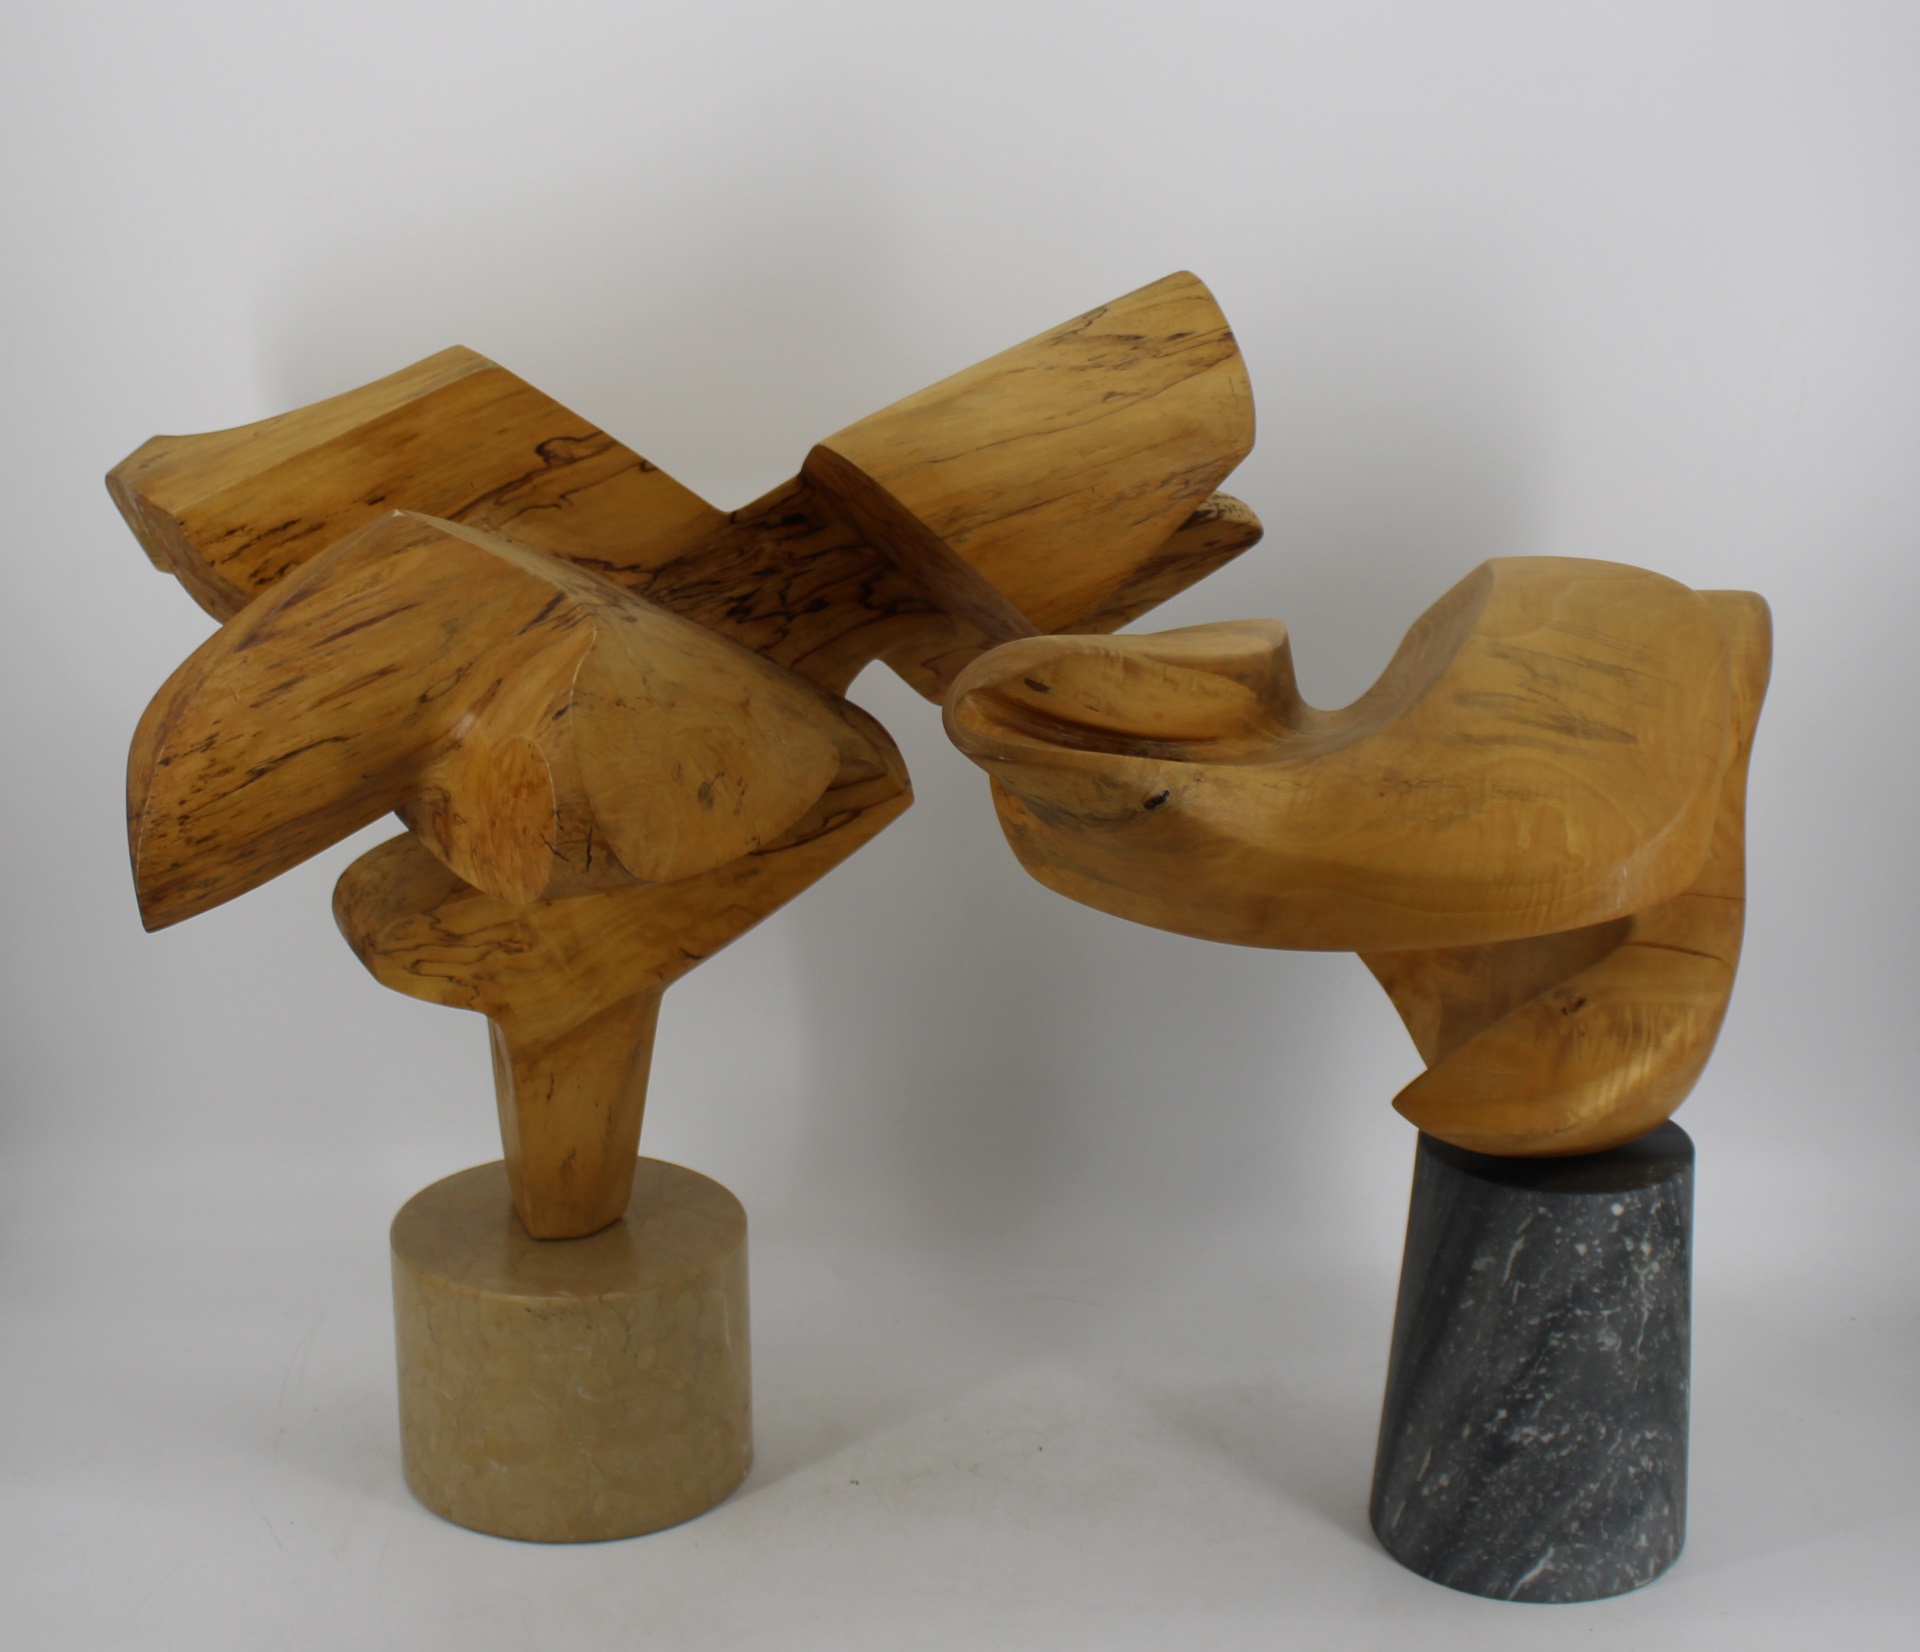 2 MIDCENTURY WOOD ABSTRACT SCULPTURES 3bc990